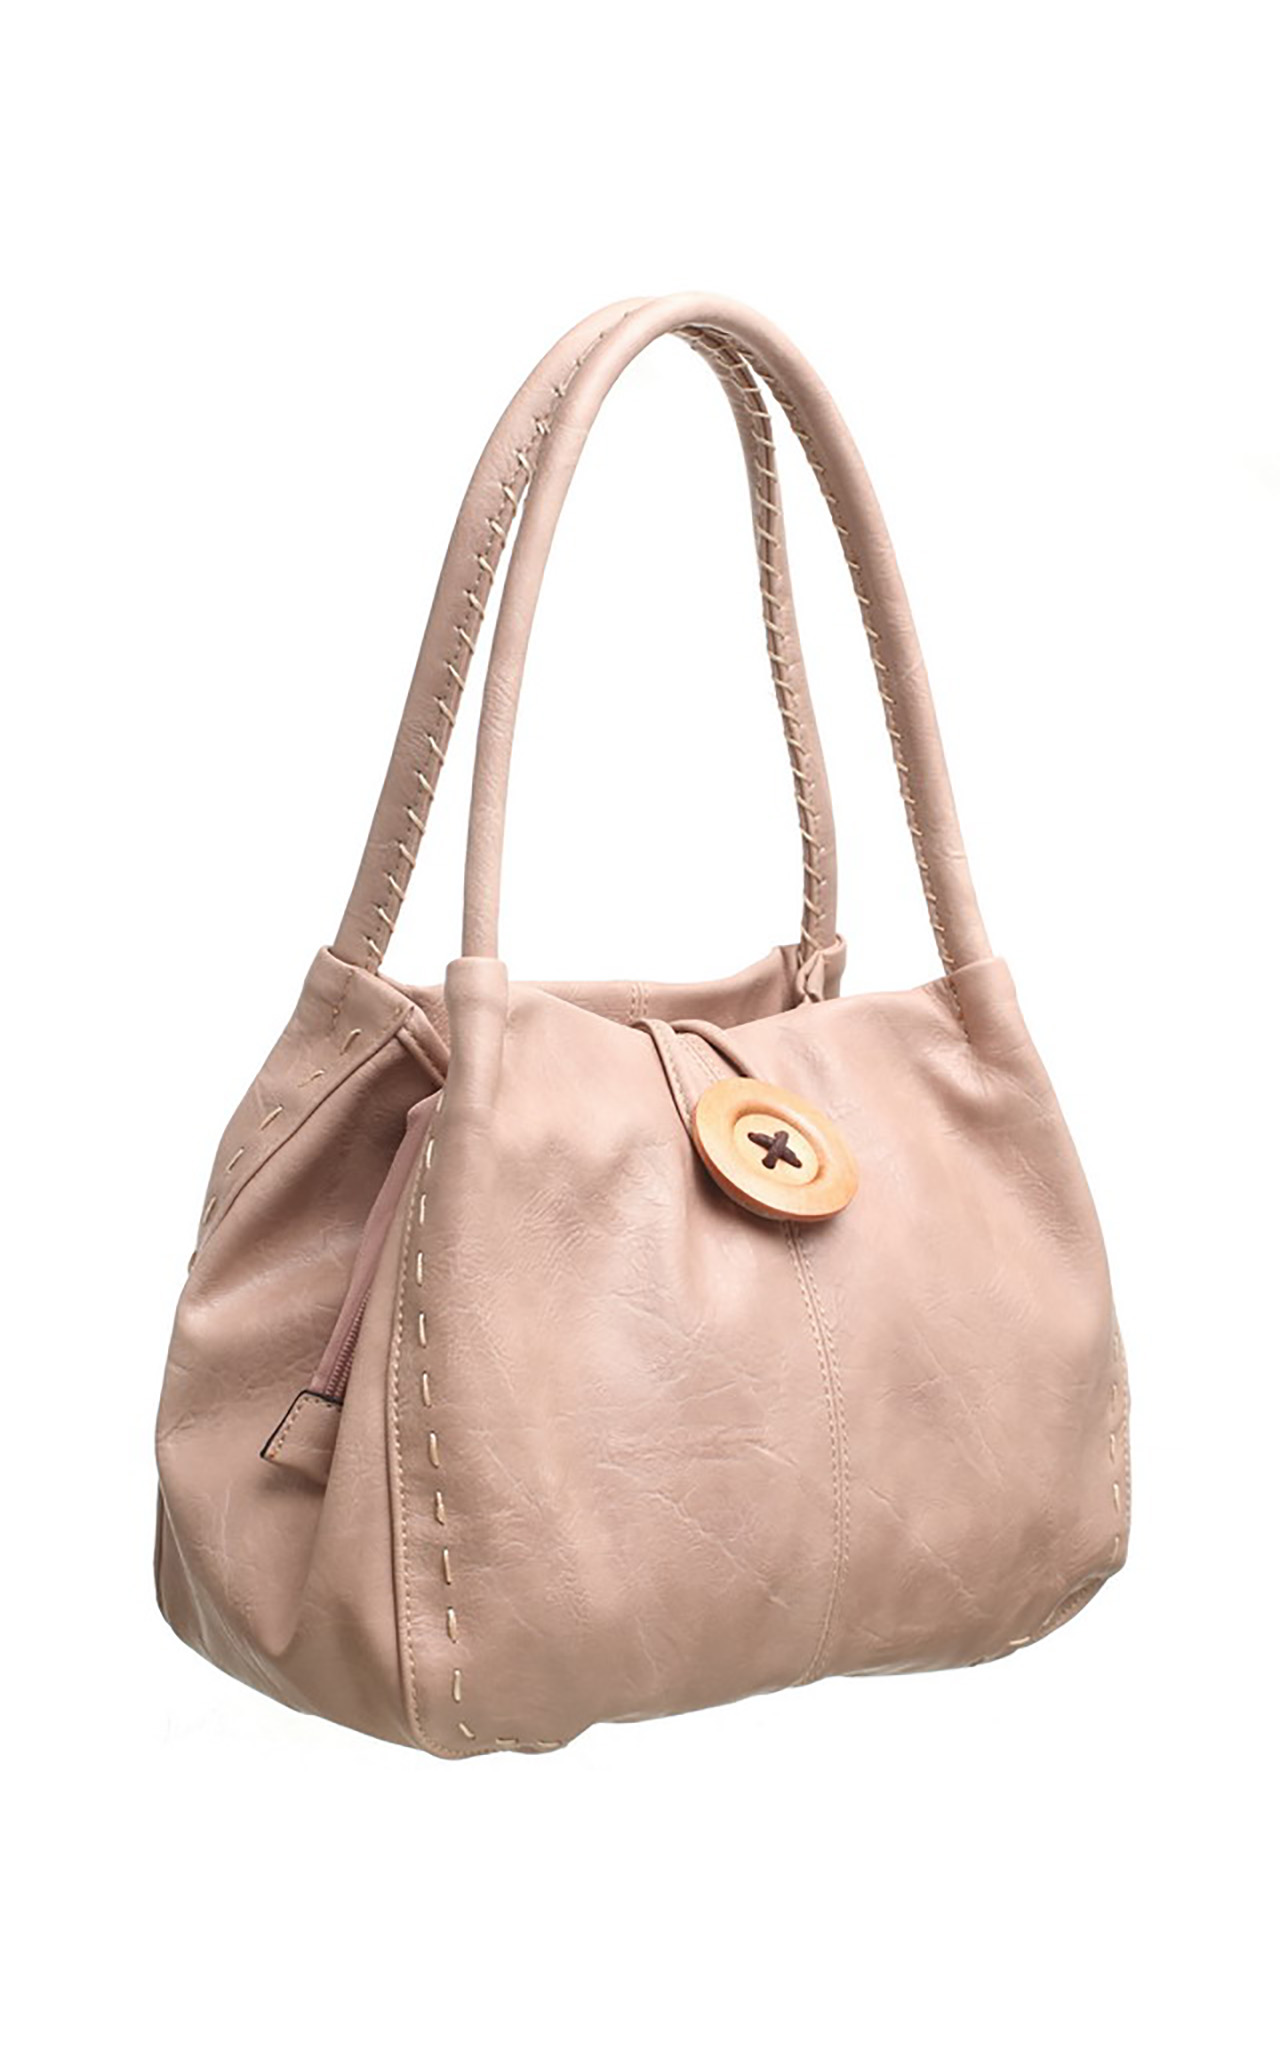 New Ladies Big Button Faux Leather Cross body Bag Handbag 14 Colours Available 